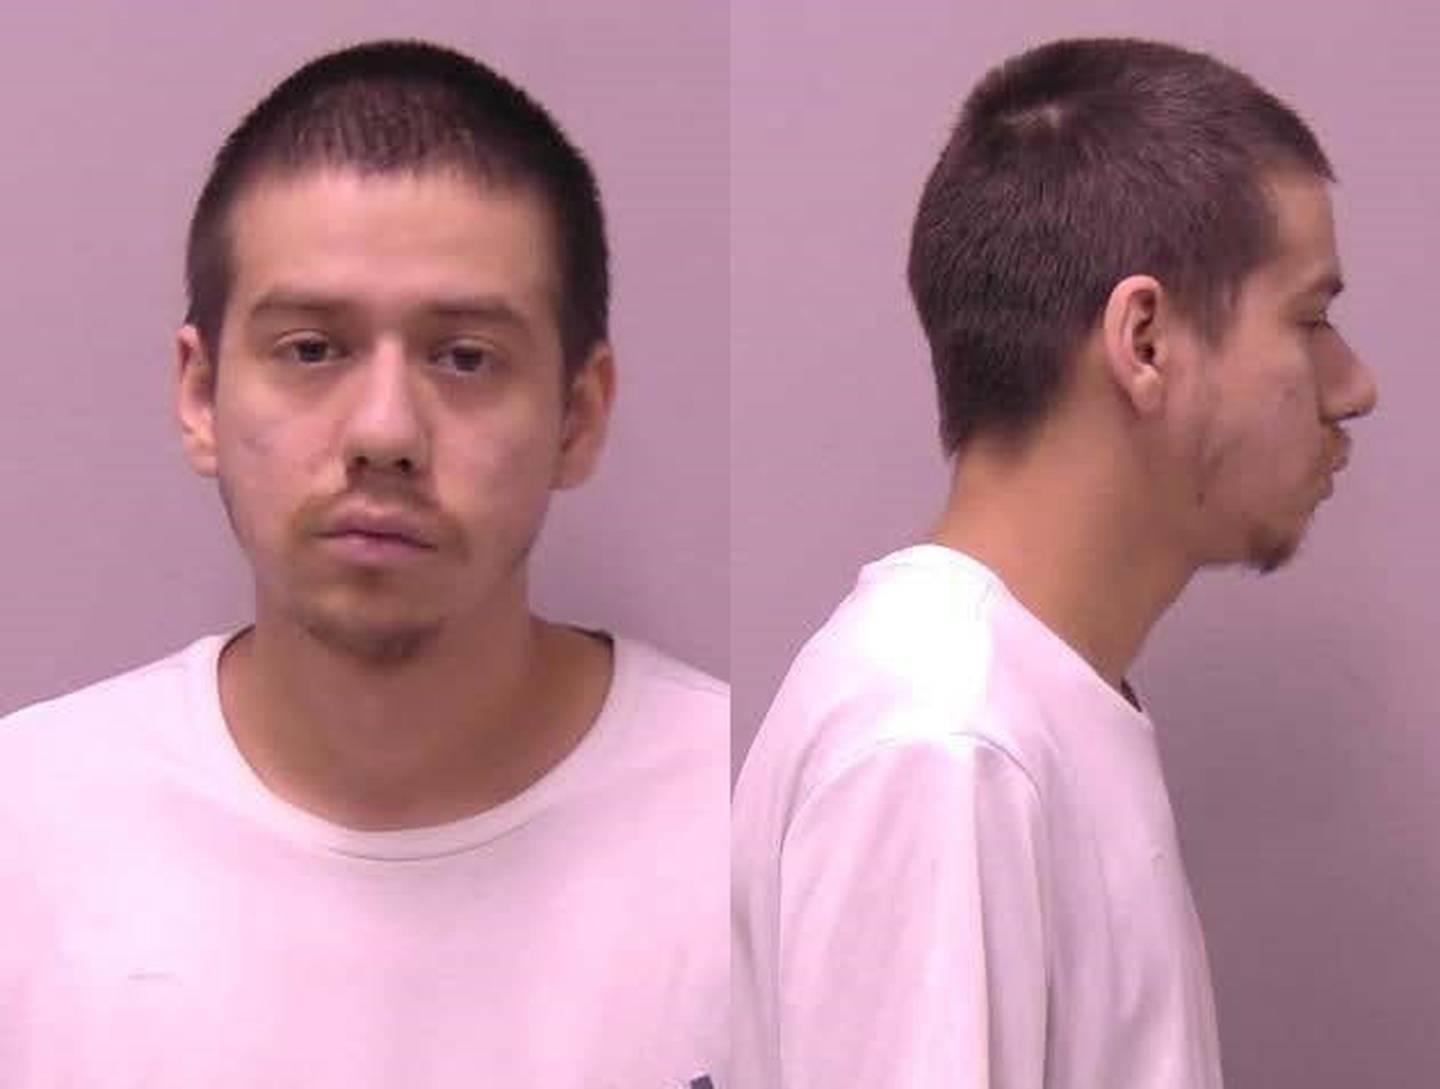 Christian Hurtado, 27, of Elgin was charged with Involuntary Servitude (Class X Felony),Trafficking in Persons (Class 1 Felony), Involuntary Servitude (Class 1 Felony), Involuntary Servitude (Class 4 Felony) and Promoting Prostitution.